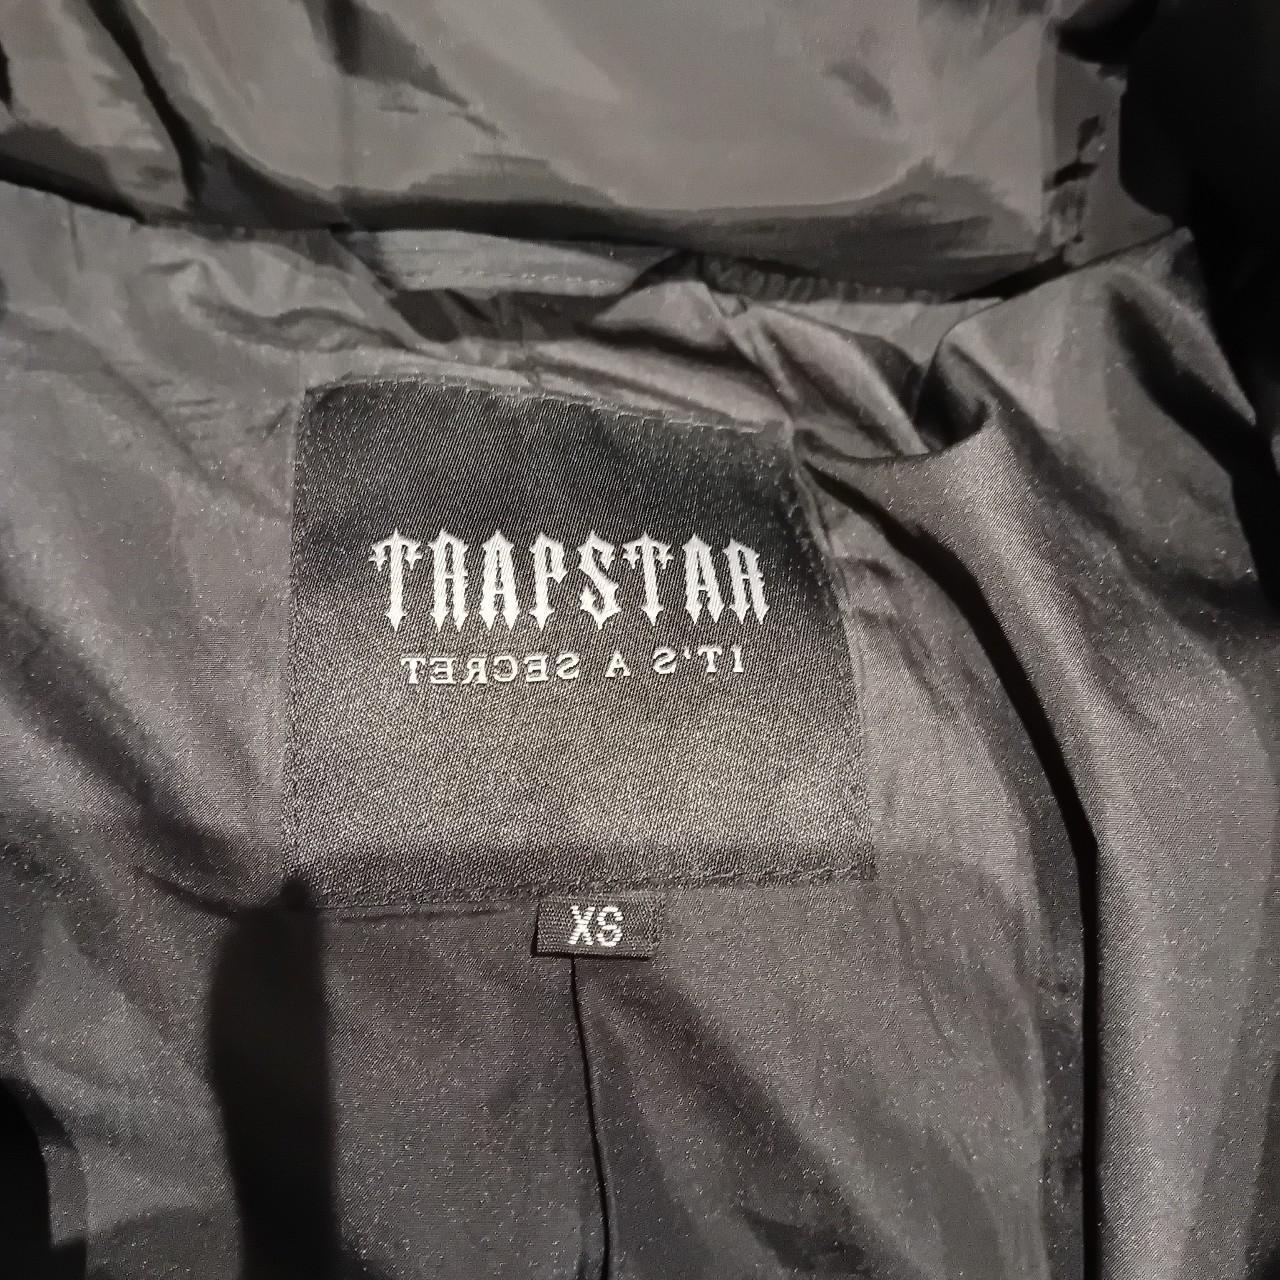 trapstar irongate jacket blackout edition in... - Depop